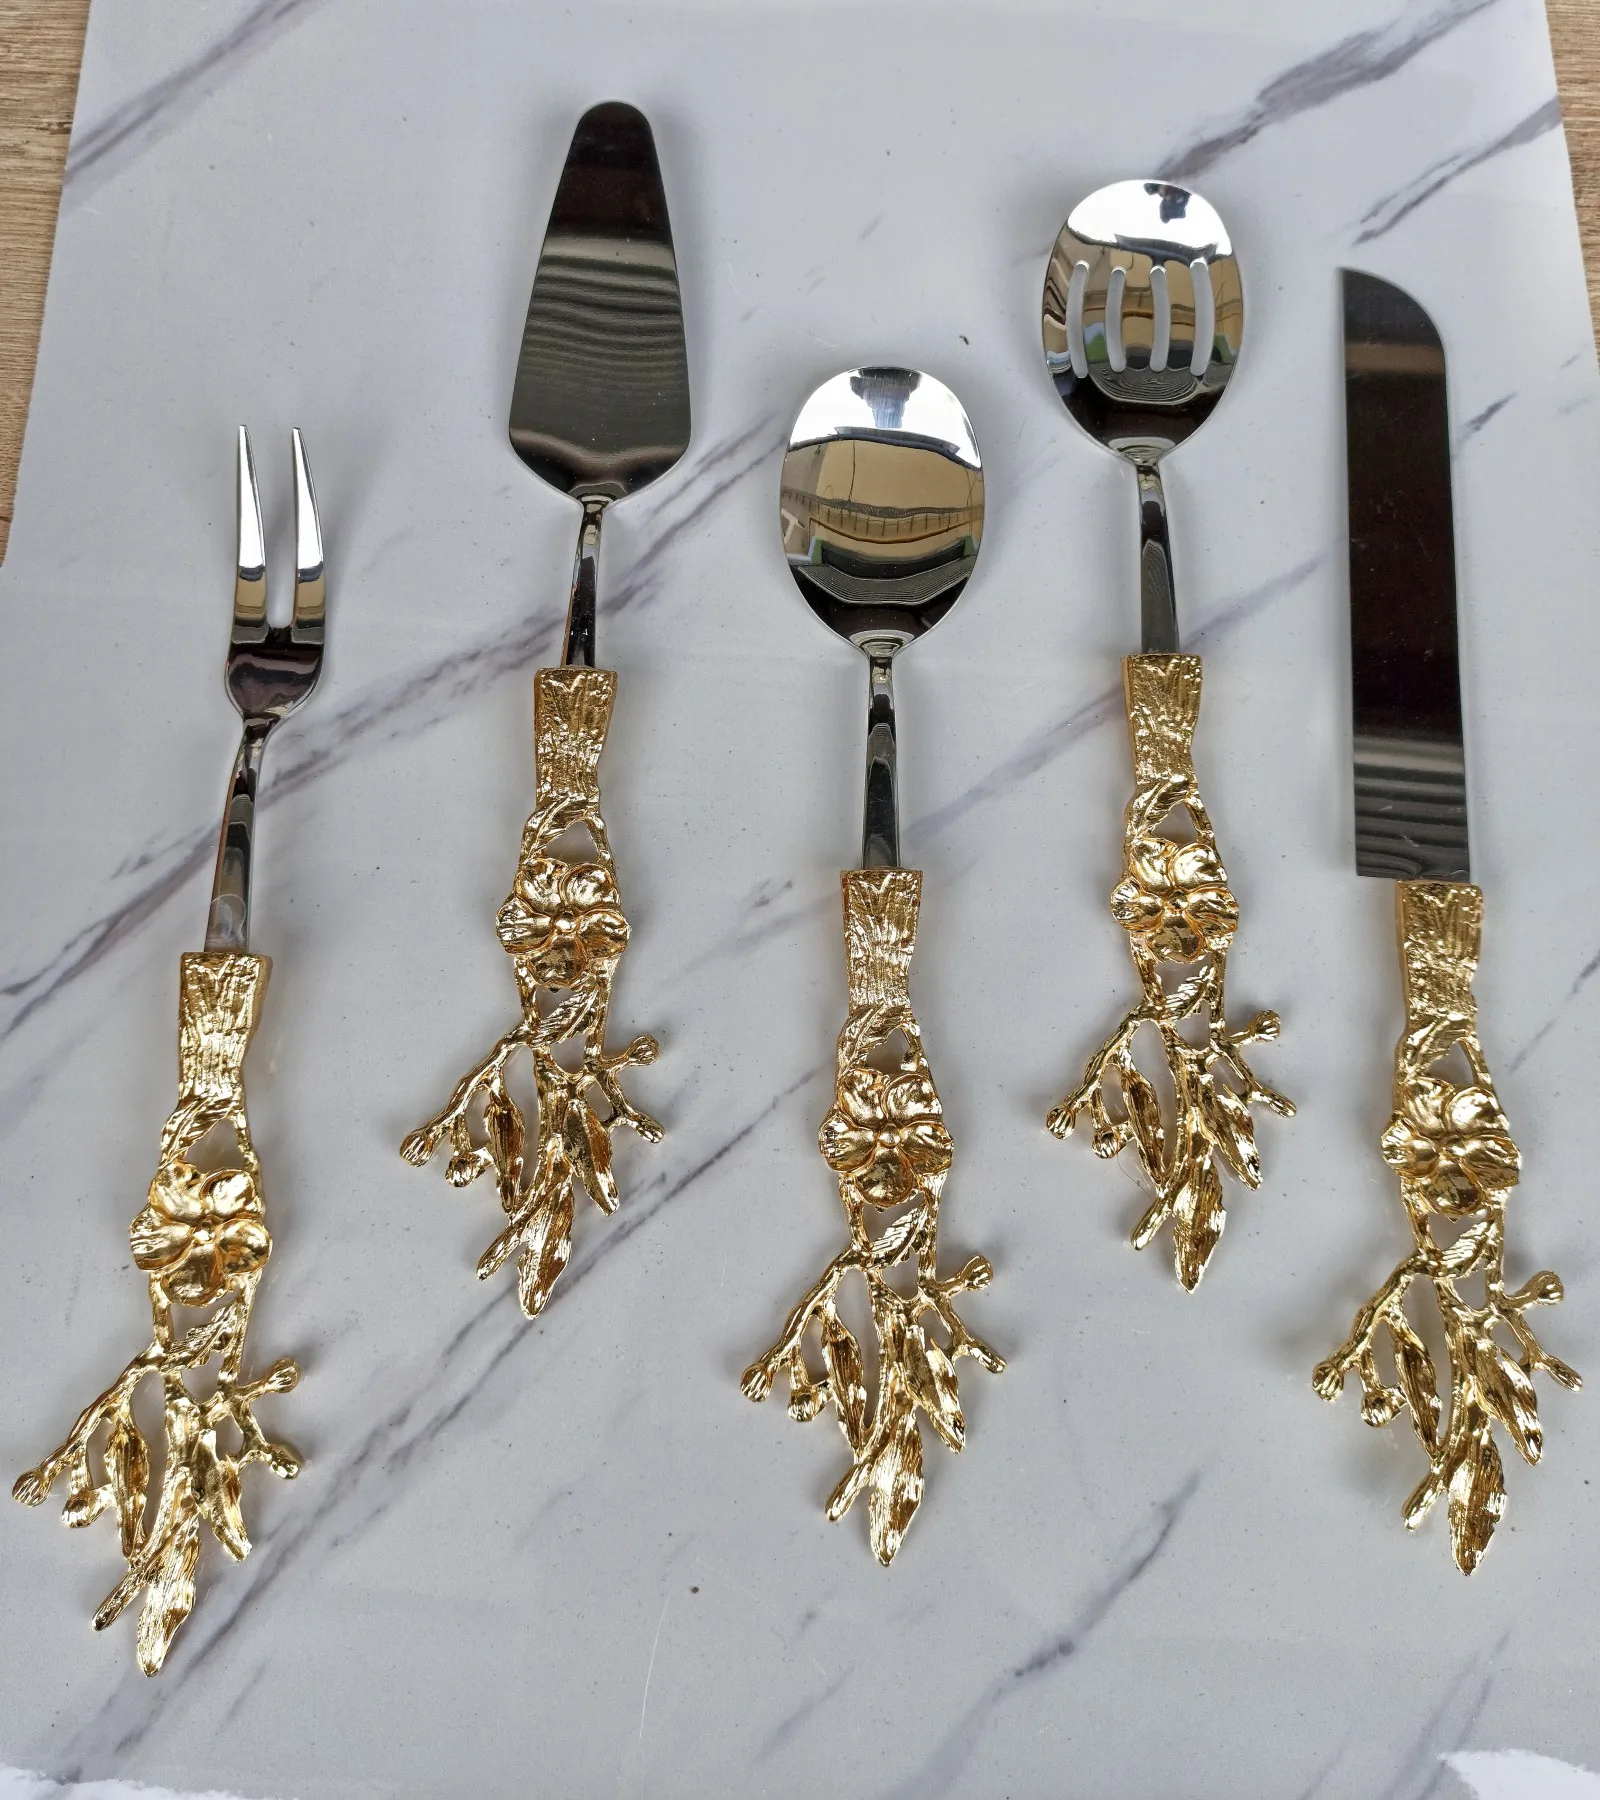 Filling Metal Material Japanese Rose Pattern Gold Silver Color High Quality Plated Craft Kitchenware Presentation Wedding Prep Special Invitations Fork Knife Cake Dinnerware Holder